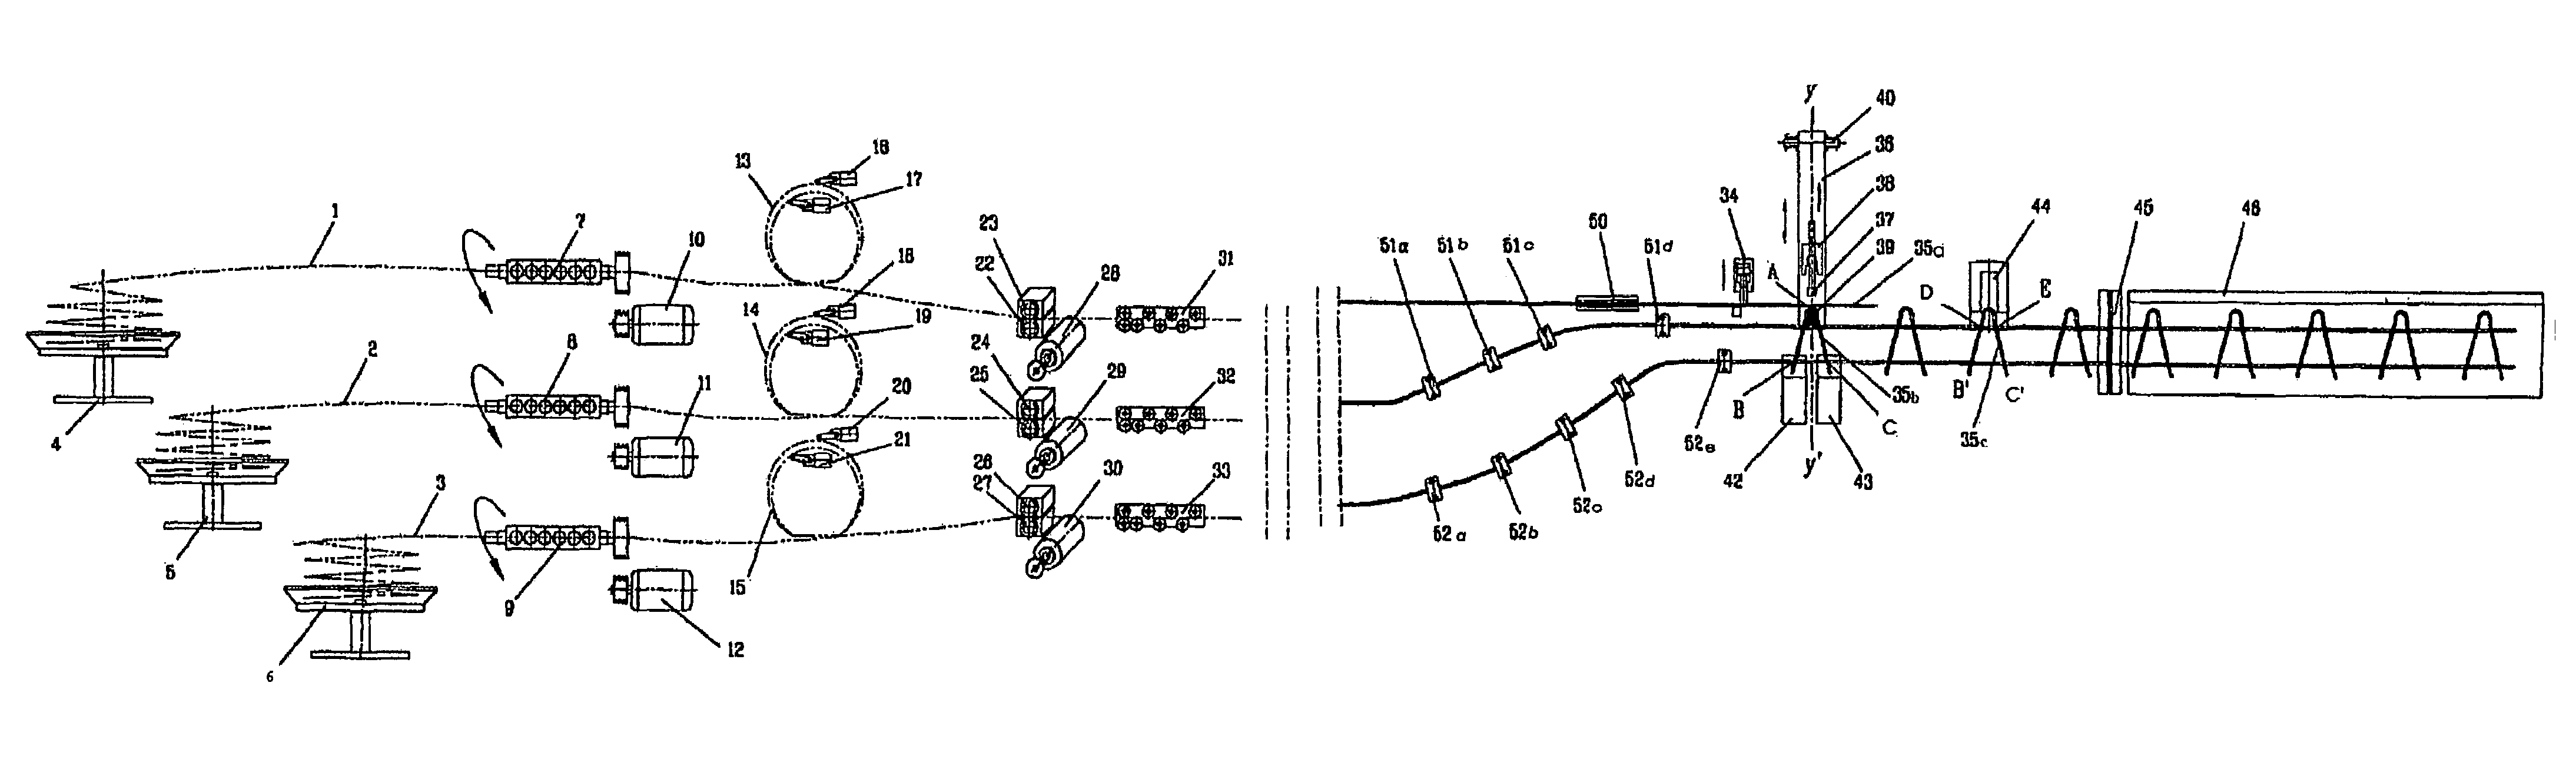 Method and machine for the production of reinforcement and dowel side frames for concrete reinforcement from wire or rod or other material of prismatic cross section